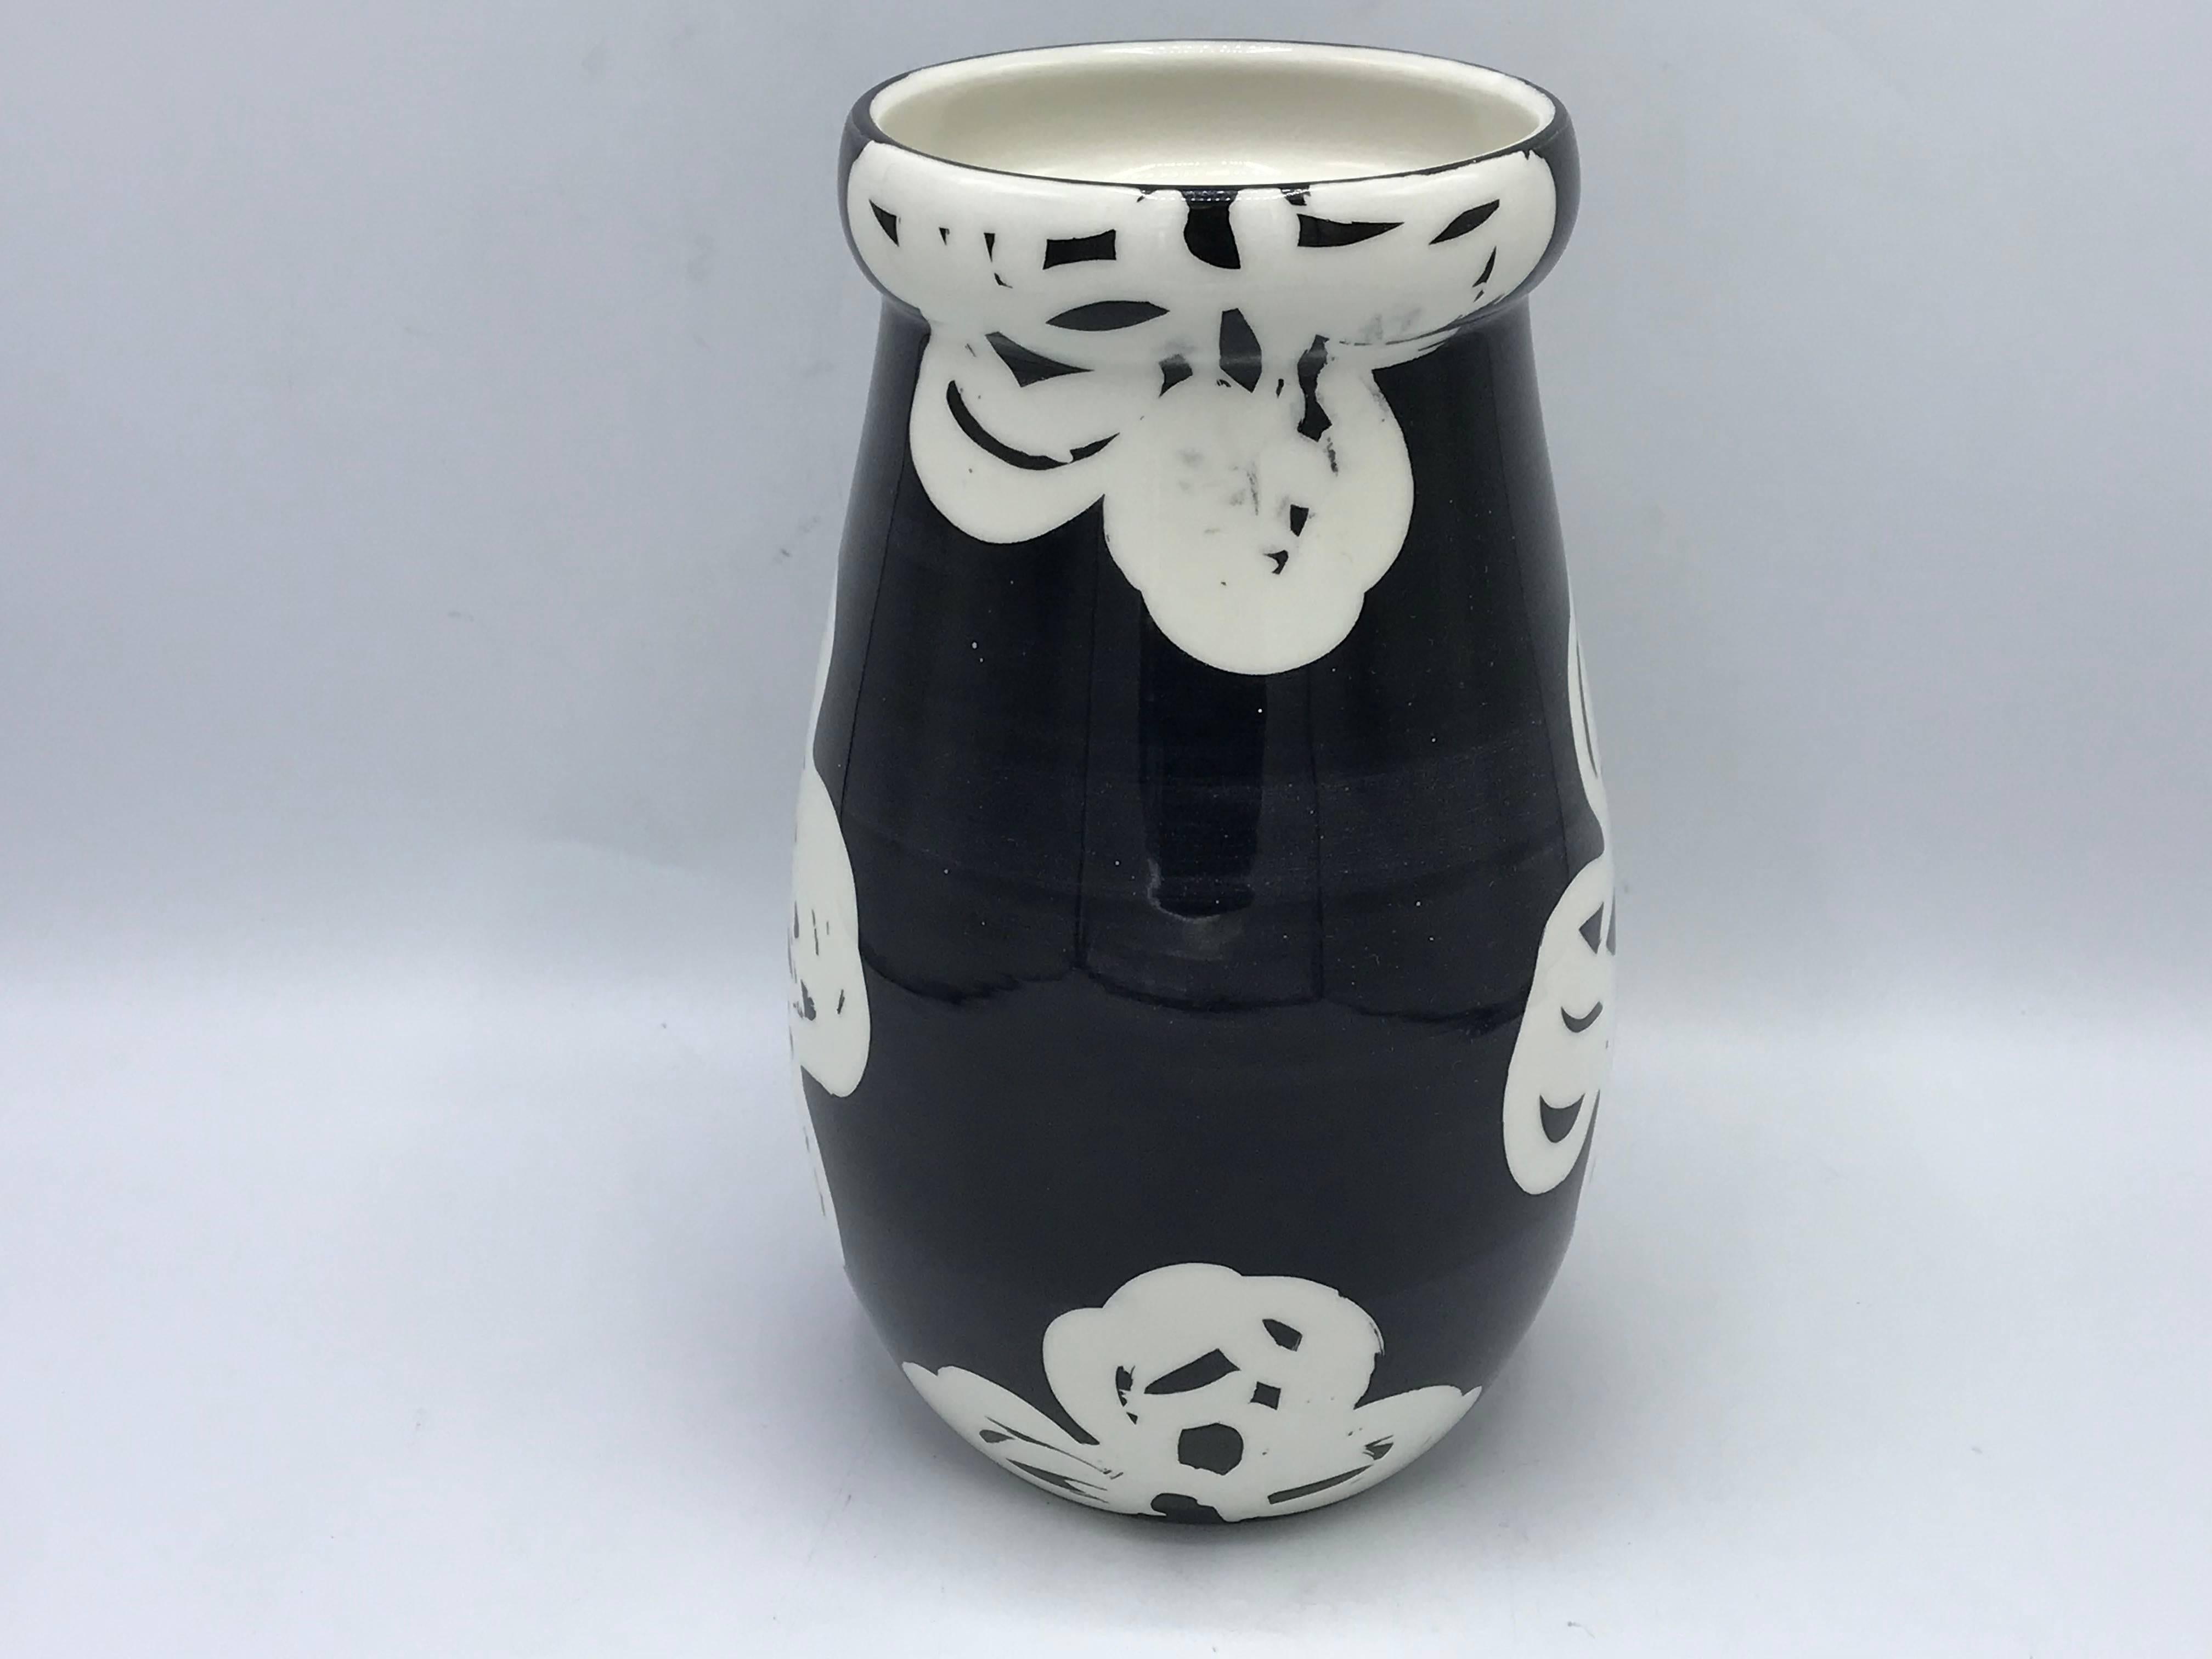 Offered is a beautiful, 1970s Bitossi vase with a modern black and white, abstract floral motif.